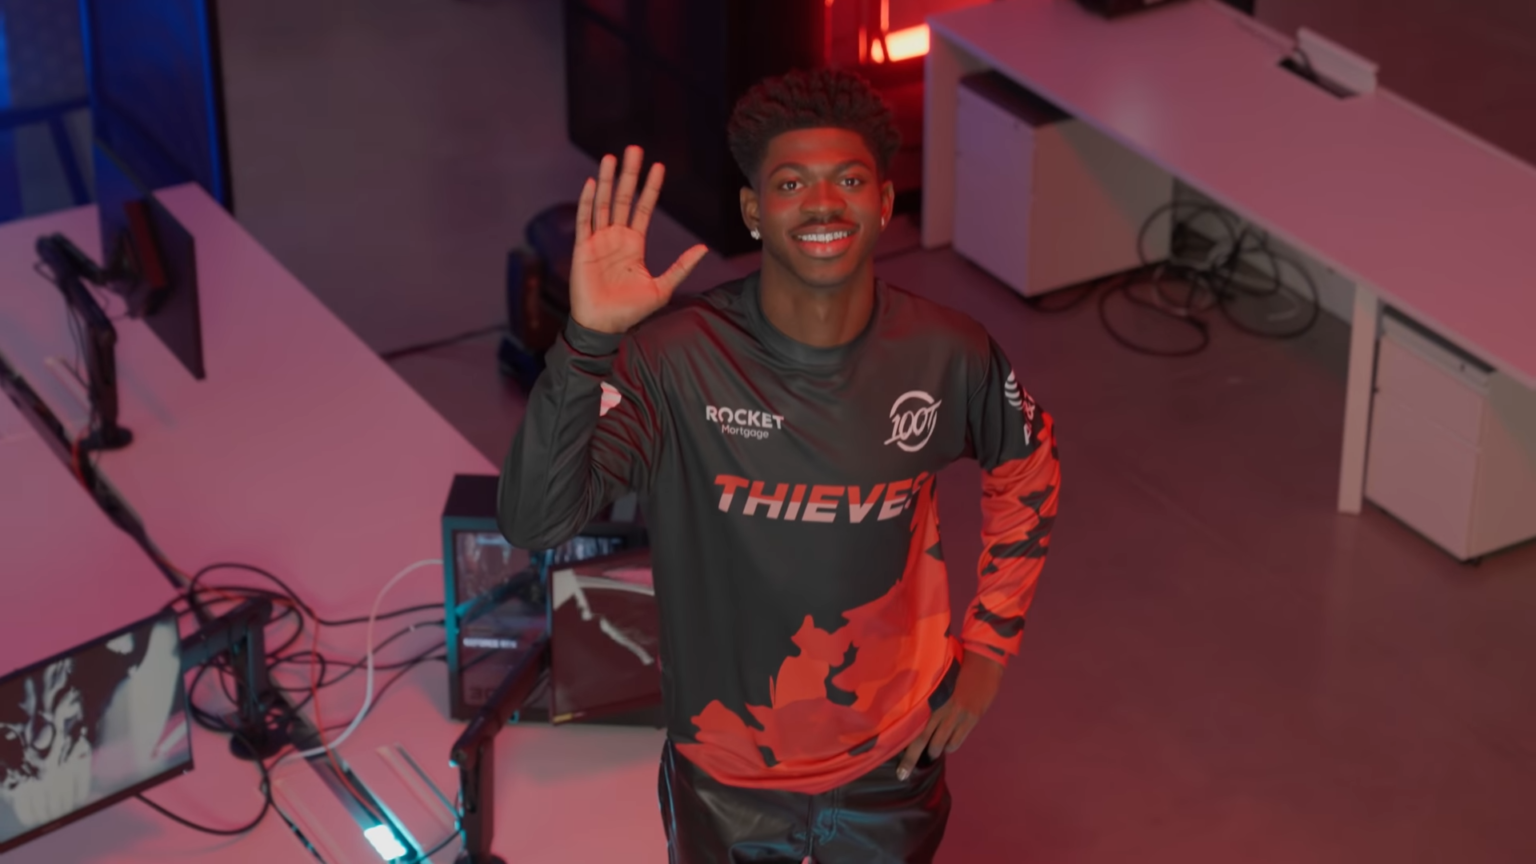 100 thieves and lil nas x collaborate in hype video ahead of worlds 2021 group stage